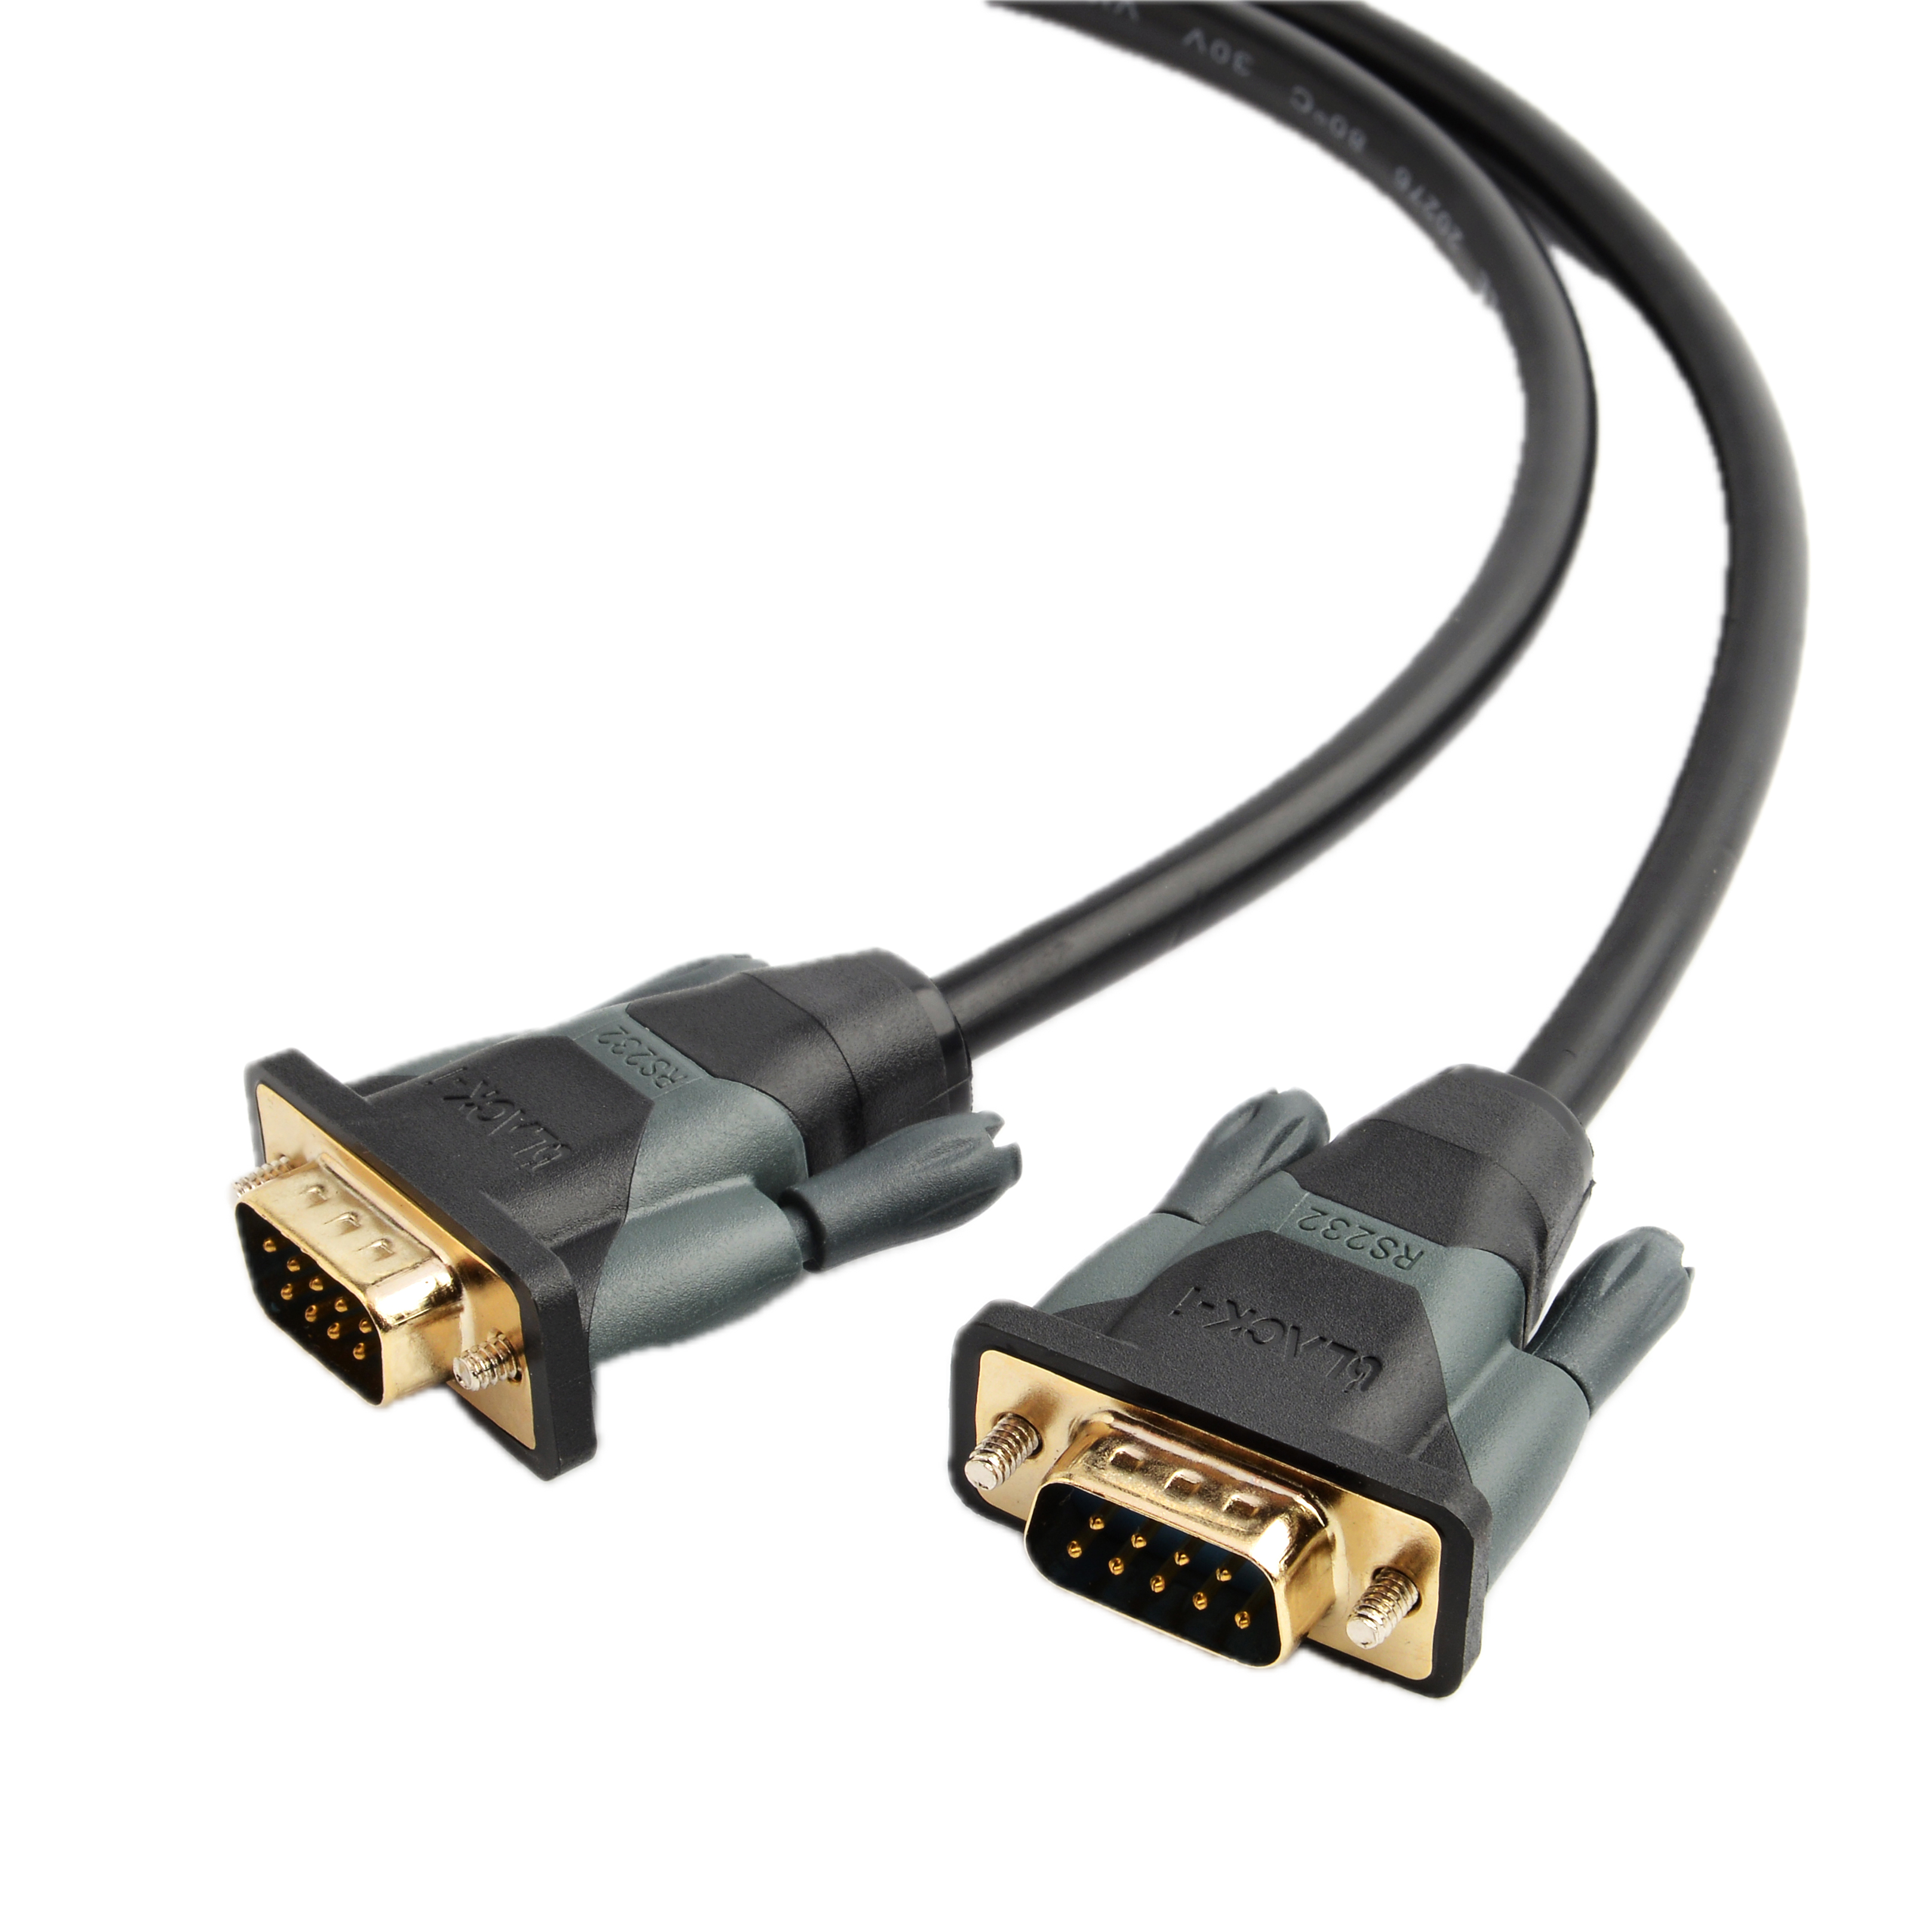 Black-i serial male to male 9 pin cable